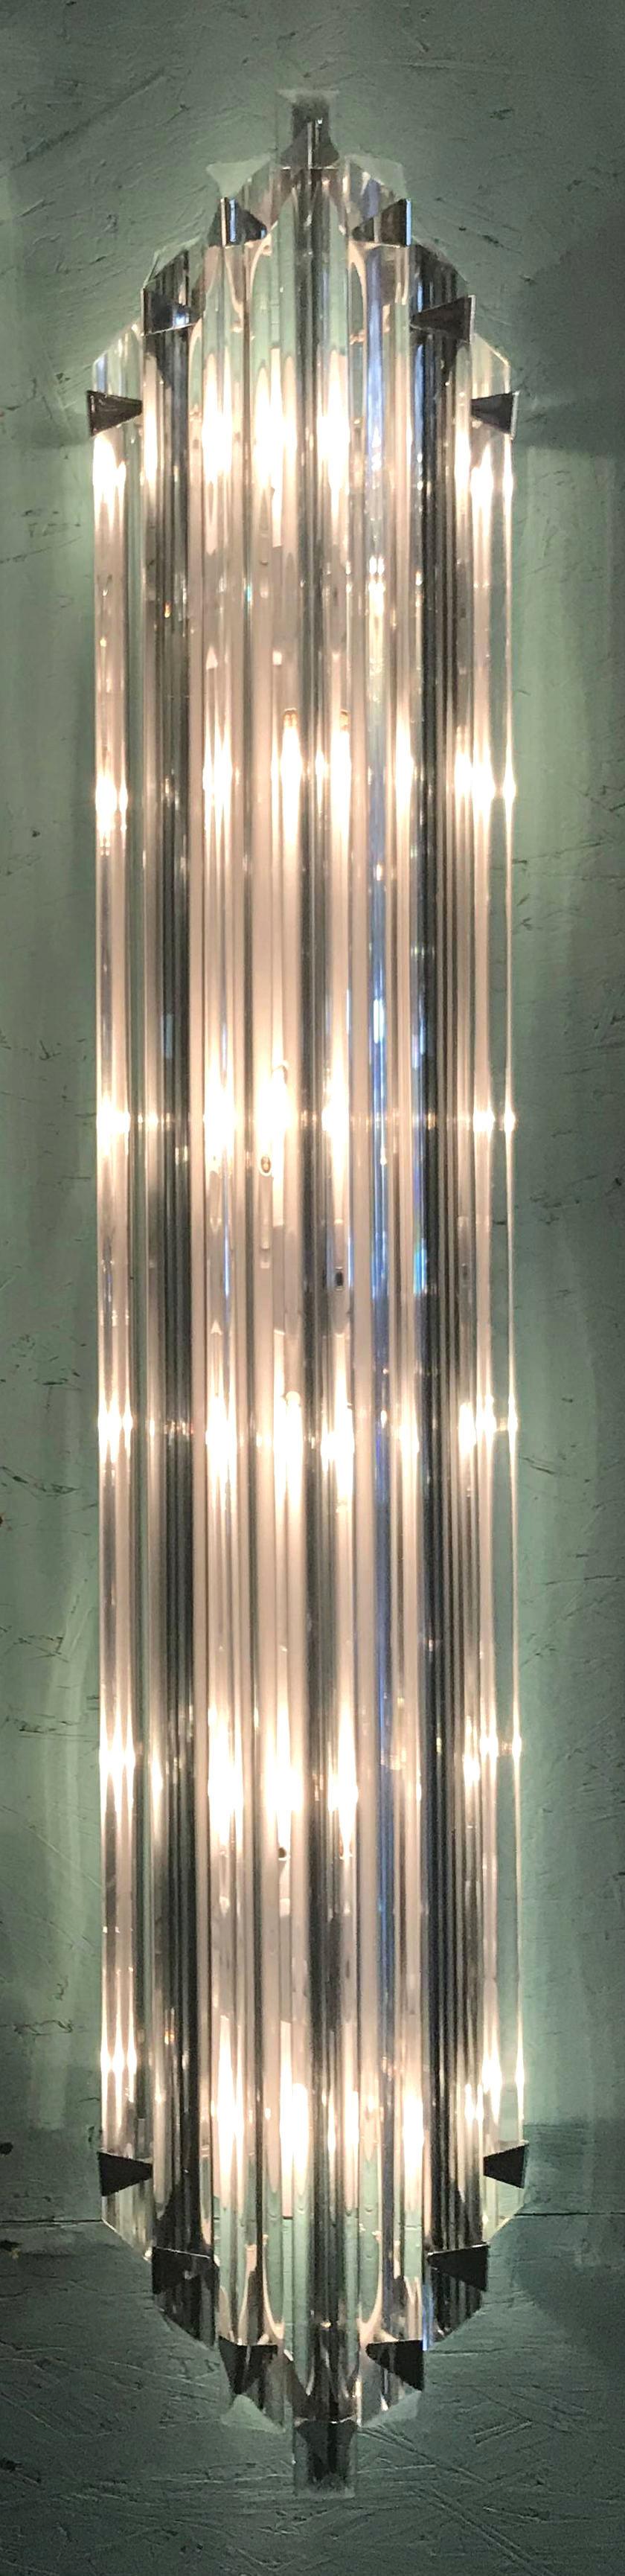 Italian wall light with clear crystals individually hand blown with smoky stripes and cut to three points in Triedri technique, mounted on chrome hardware and white metal back plate / Designed by Fabio Bergomi for Fabio Ltd / Made in Italy
6 lights